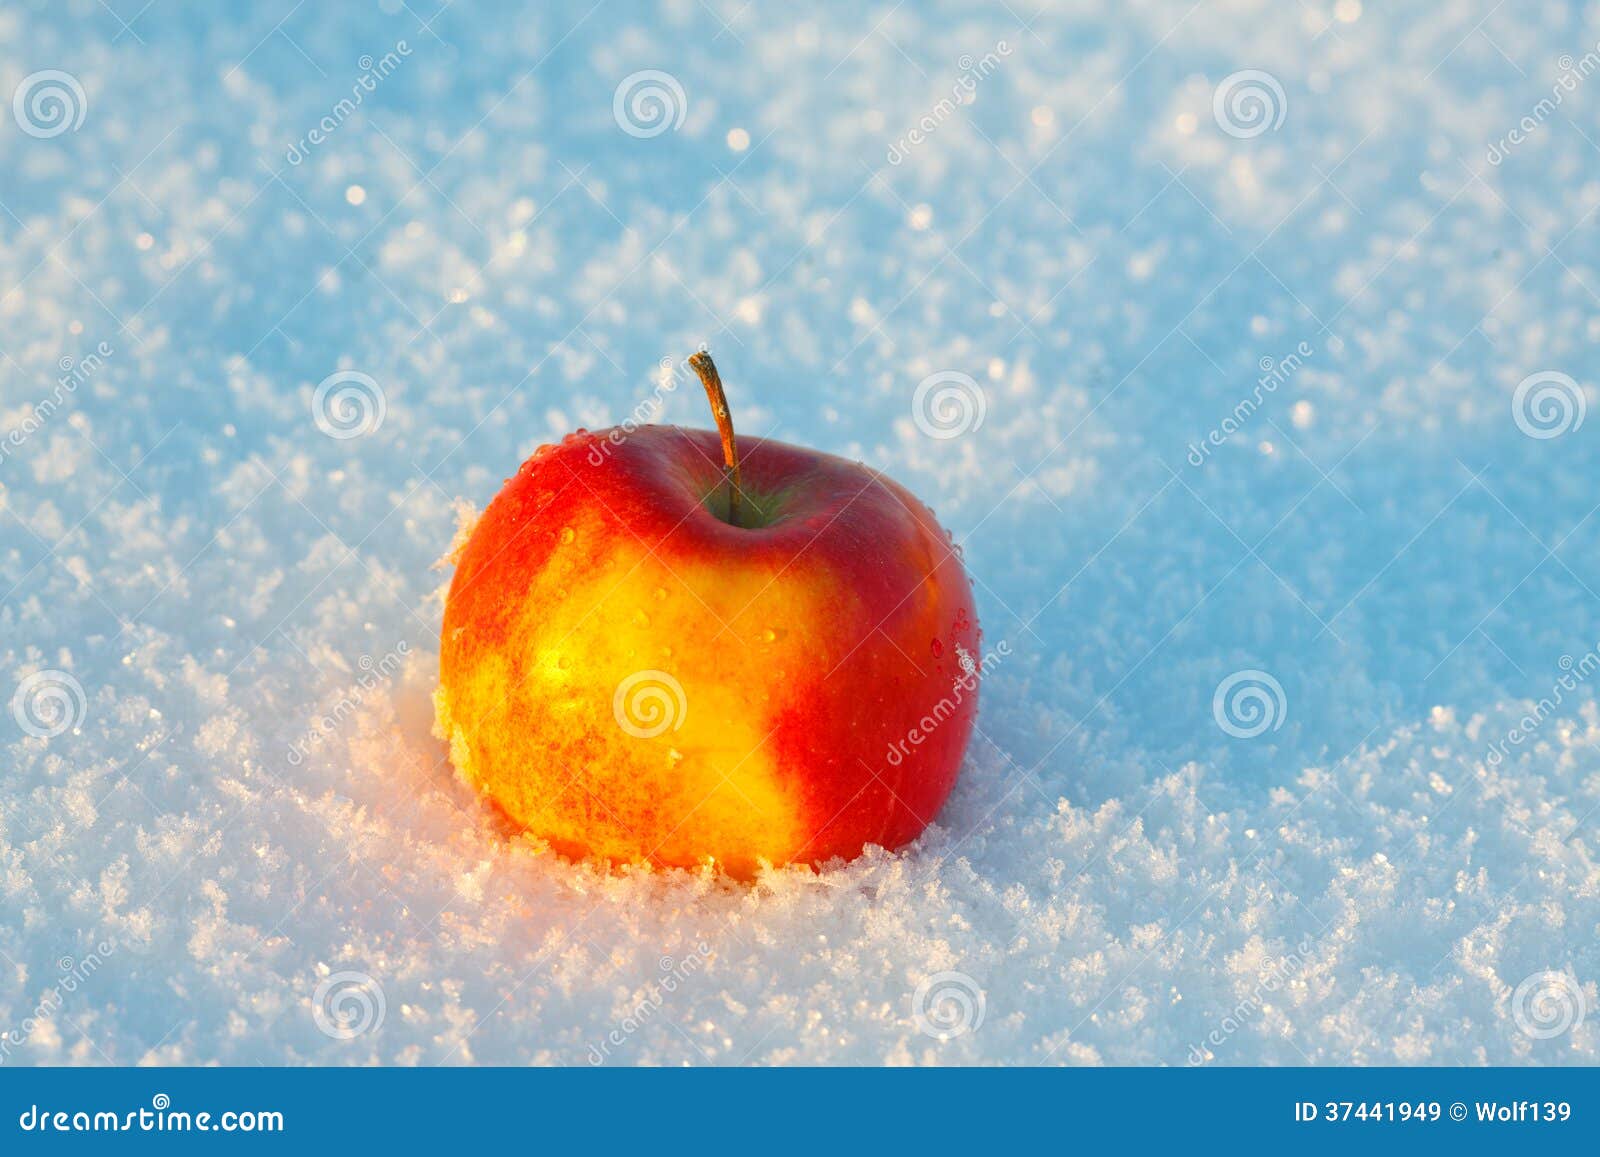 One apple in the snow stock image. Image of apples, fruits - 37441949